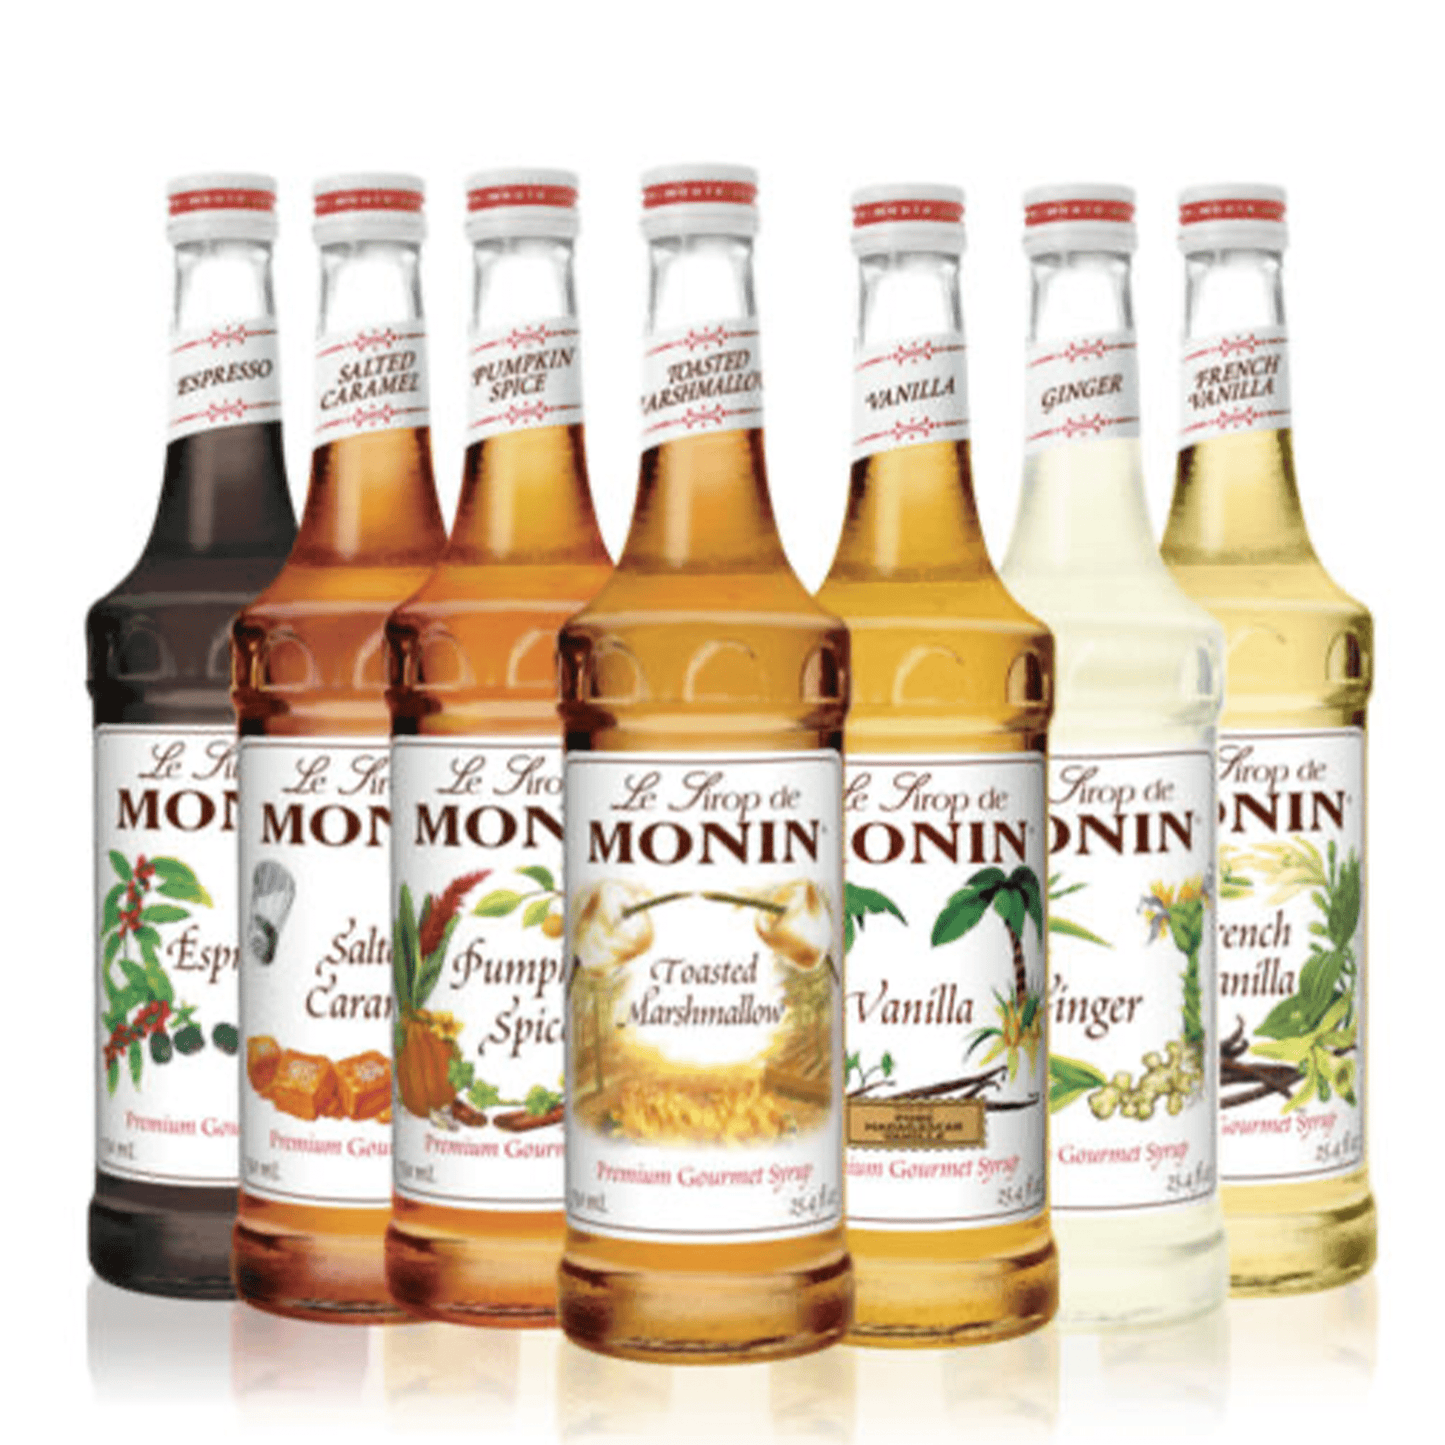 Monin Adds Ready-to-drink Cocktail Mixer Flavors